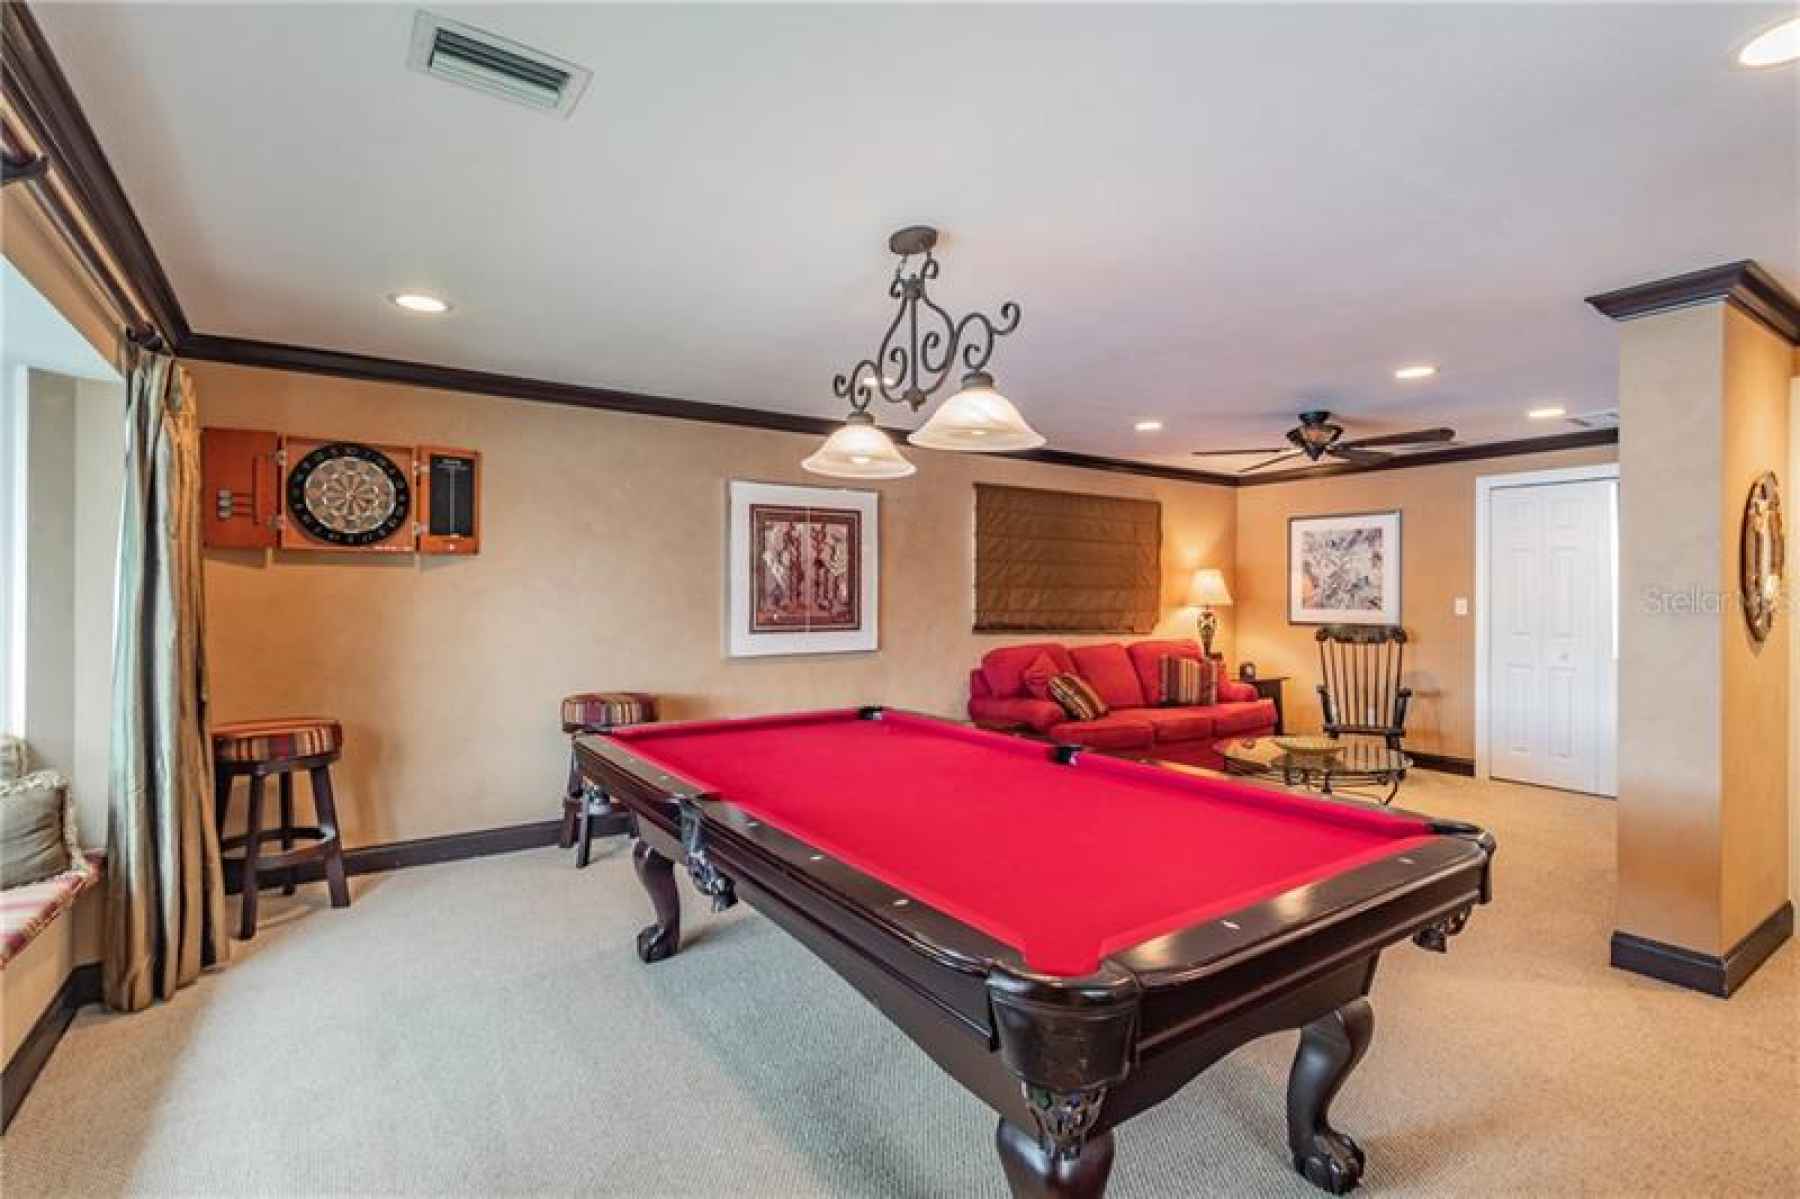 Bonus suite, currently used as game room with study area for the kids. Full bath with pool access ma